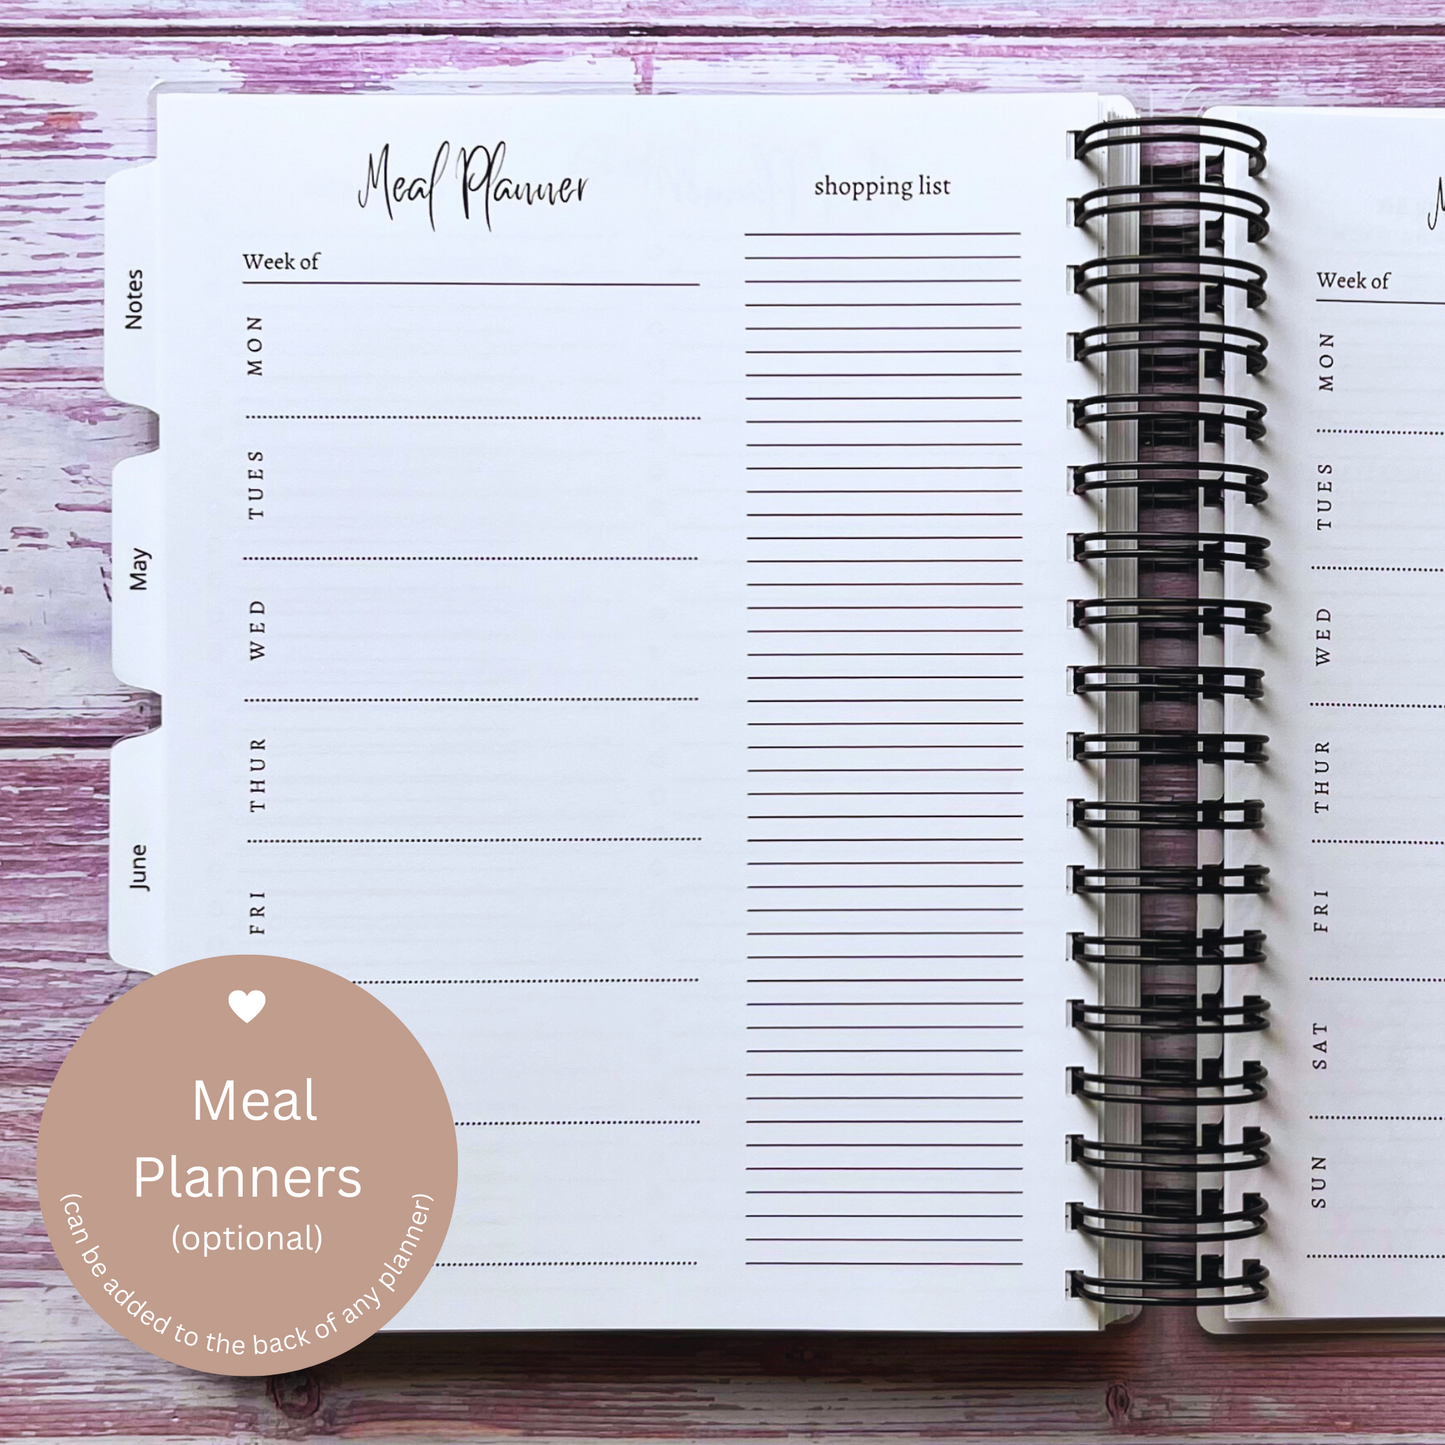 Personalized Weekly Planner | Mystical Spells